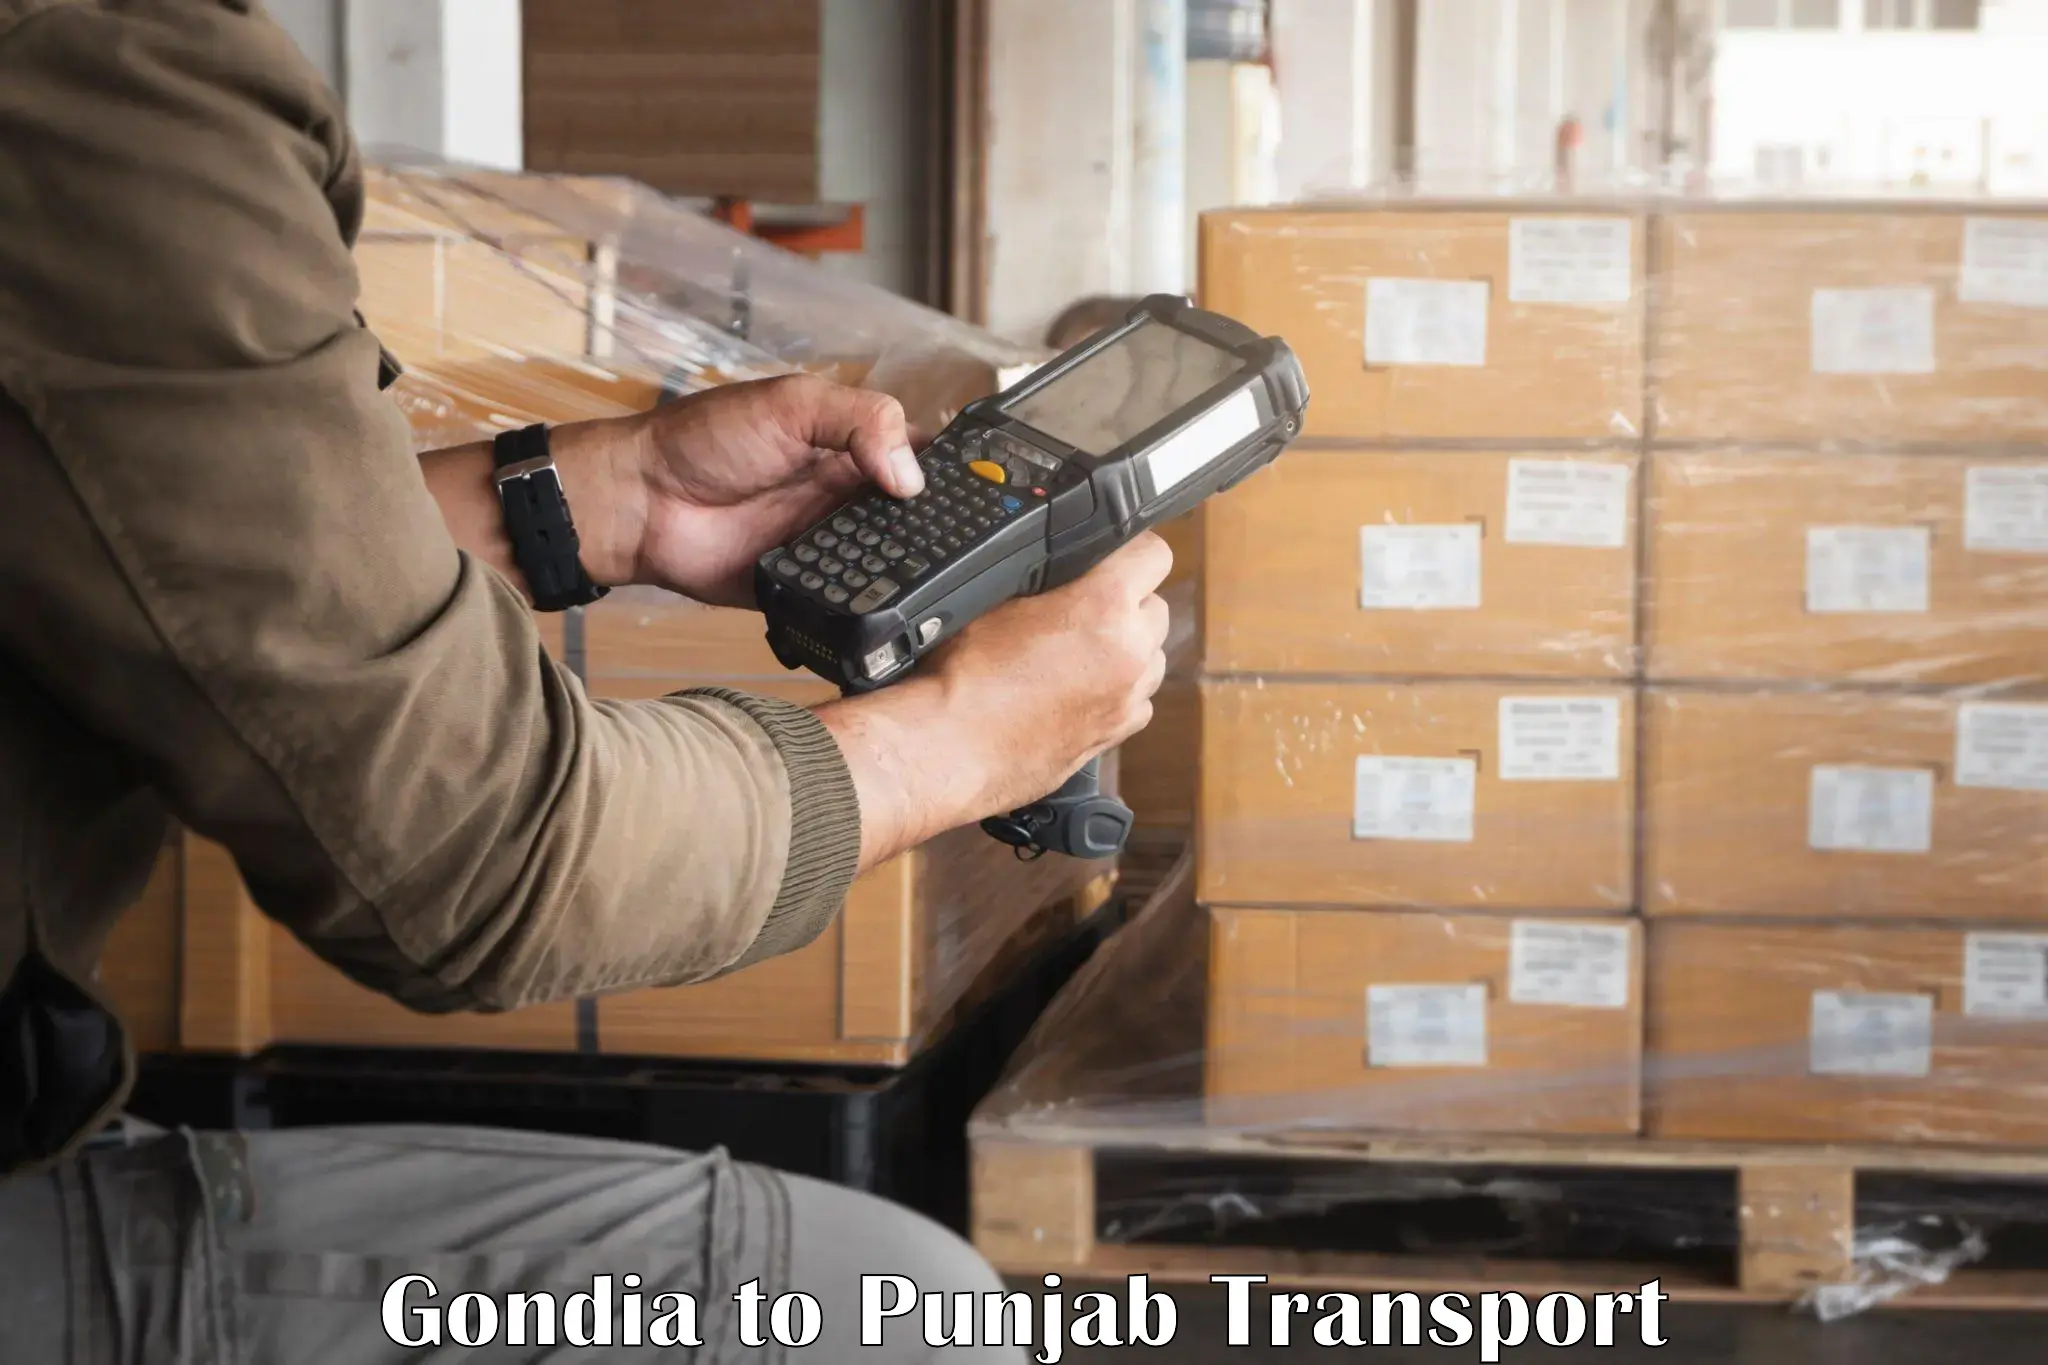 Express transport services Gondia to Pathankot